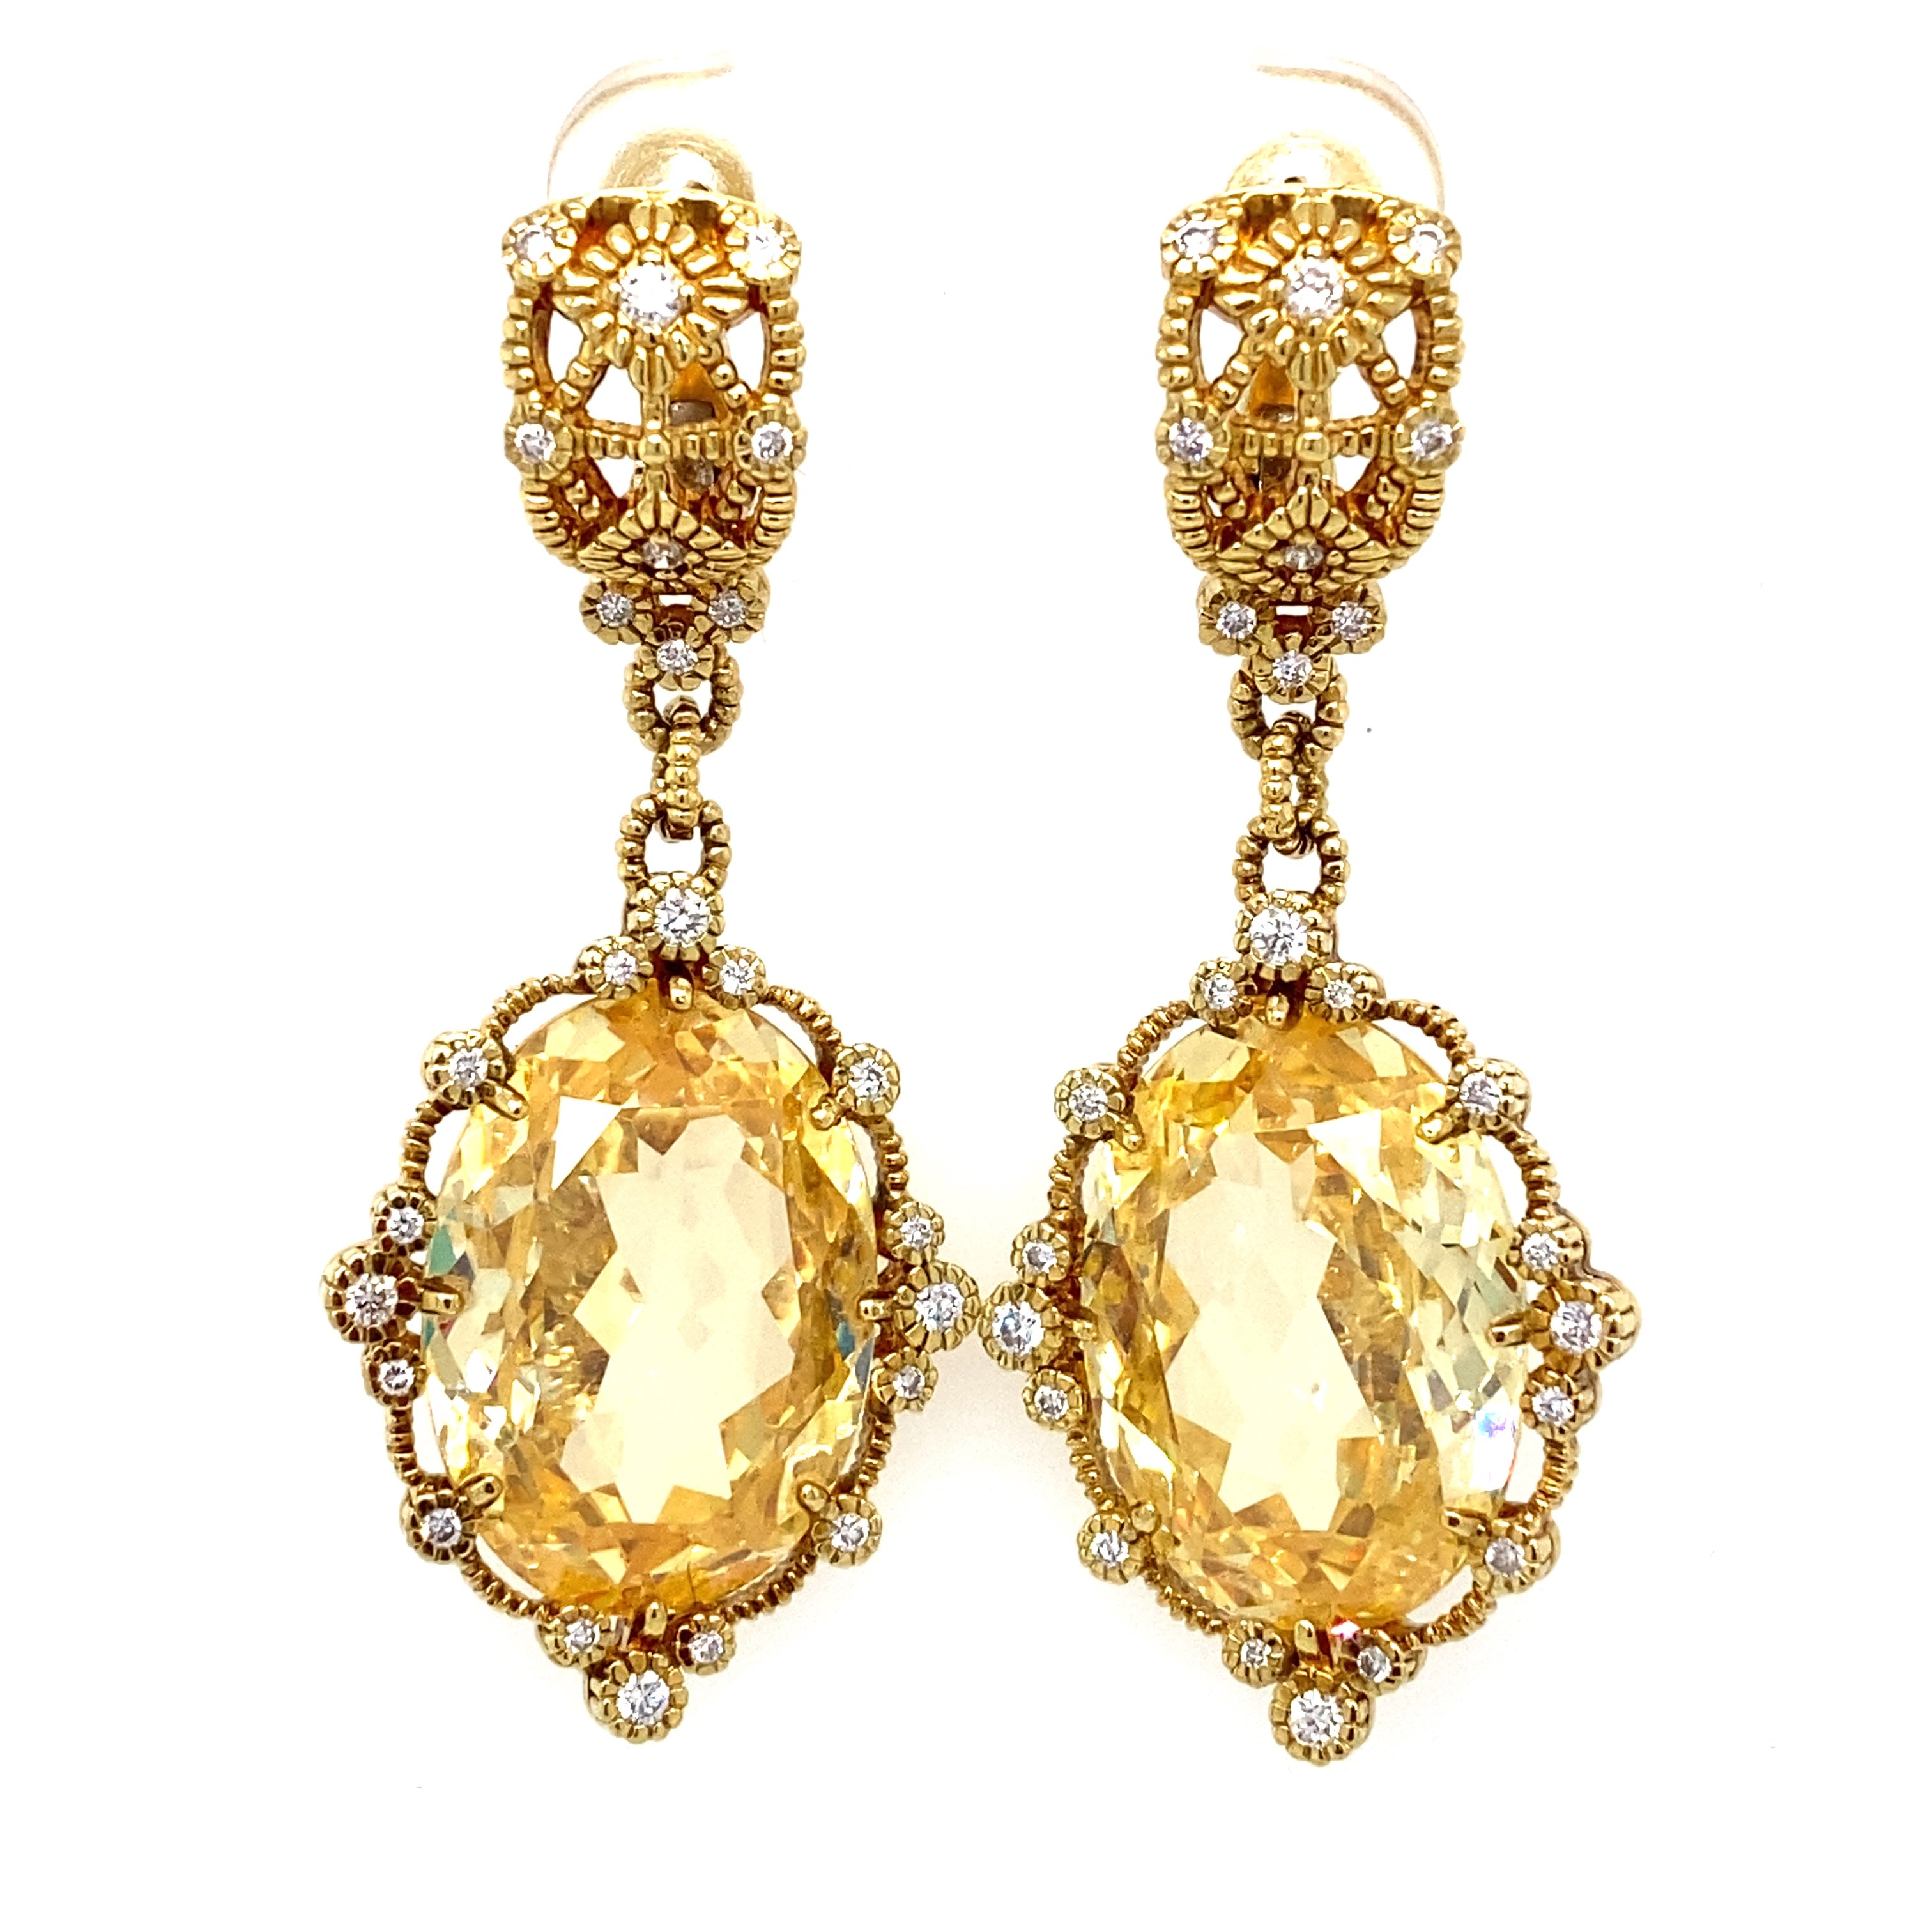 Judith Ripka 18K Yellow Gold Necklace & Earrings Jewelry Set – The